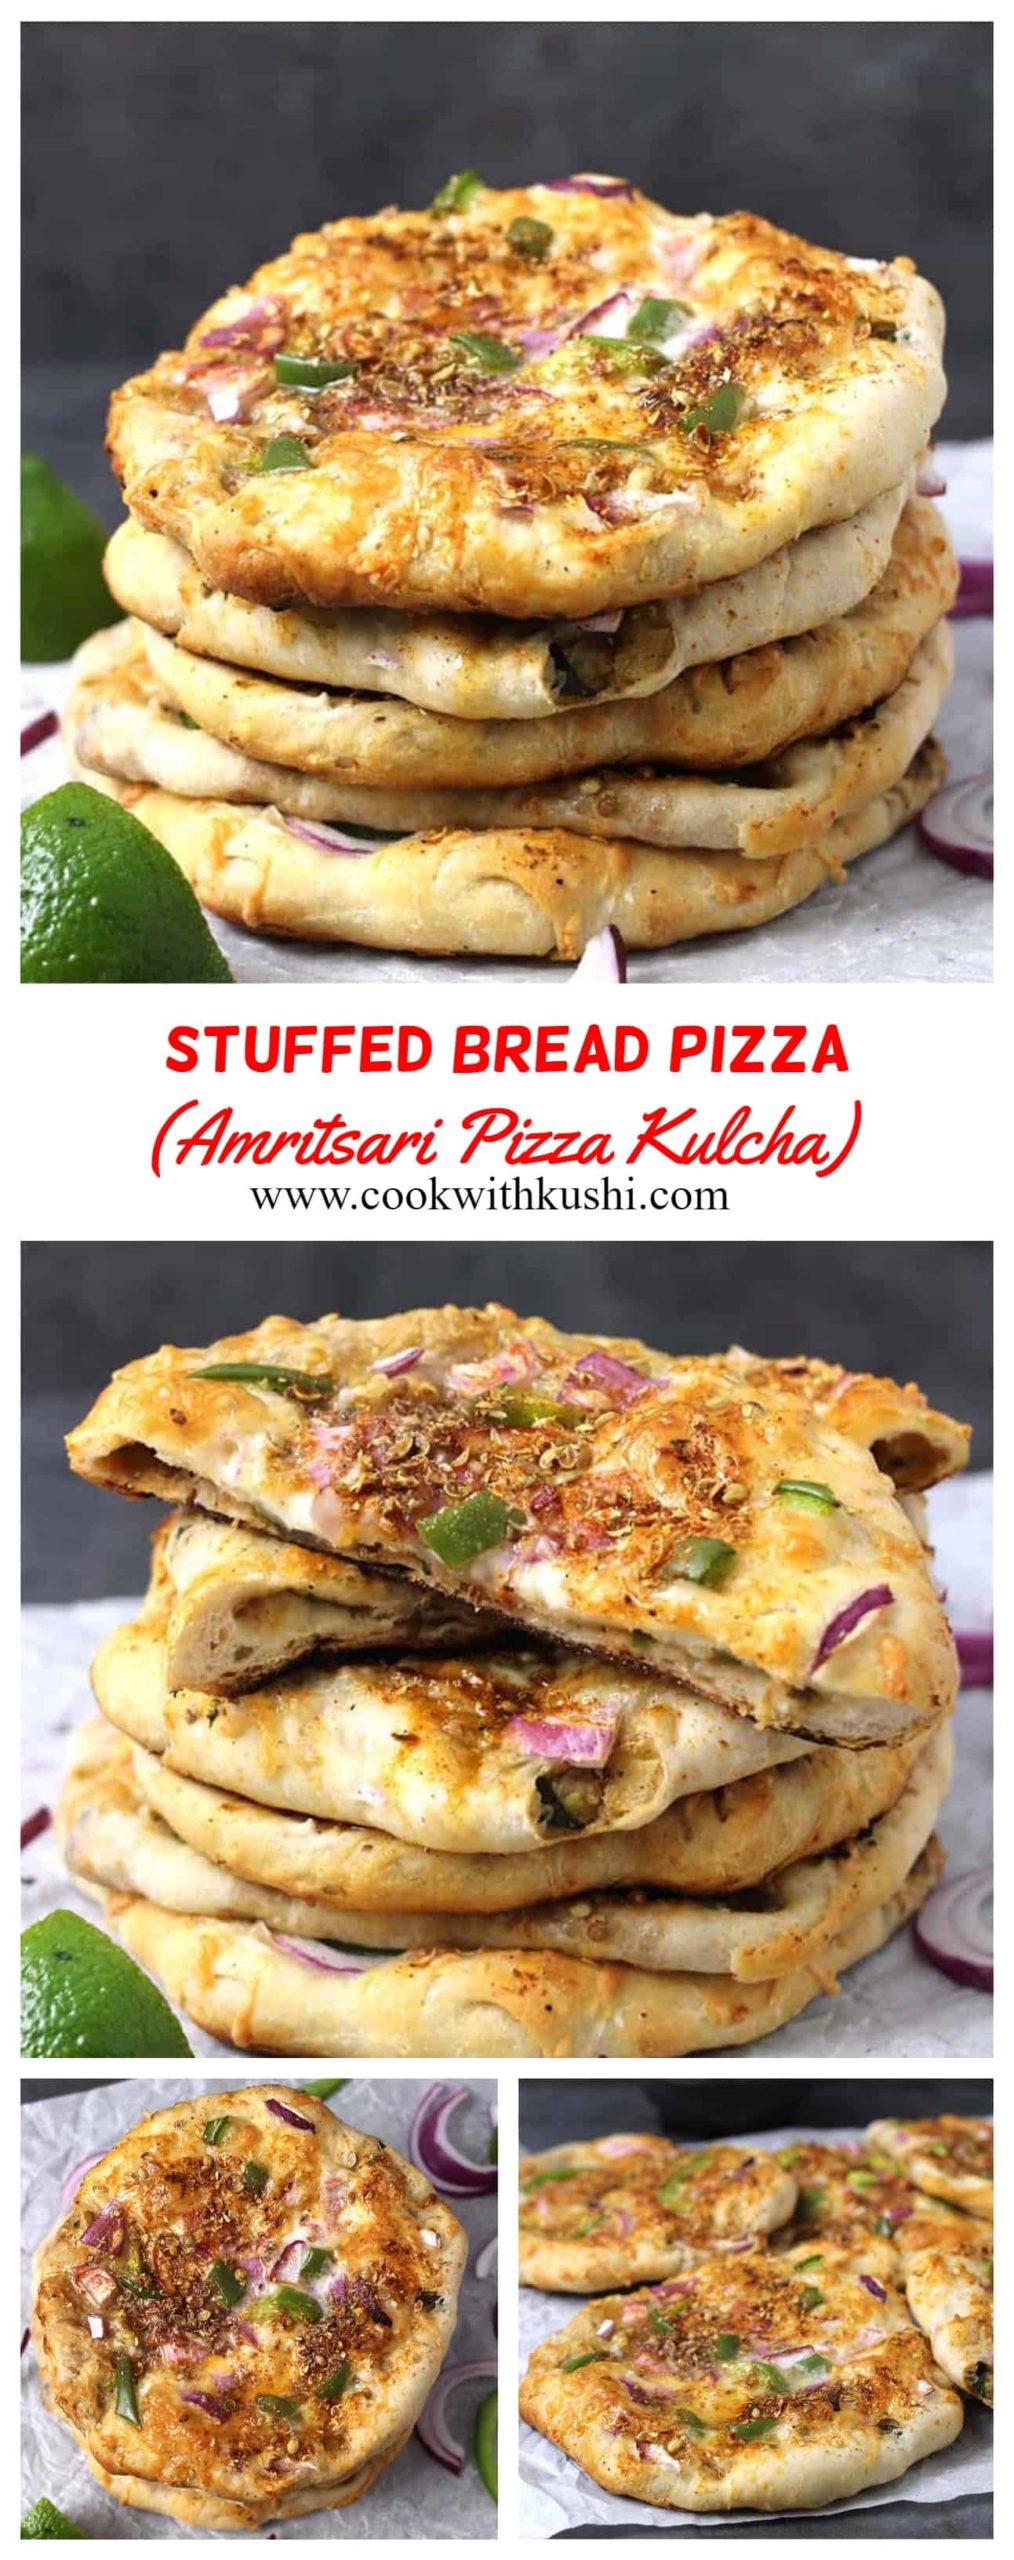 Amritsari Pizza Kulcha or Stuffed bread pizza is a variation to traditional Indian kulcha where the flatbread is stuffed with potatoes (aloo) and onion (pyaaz) along with aromatic spices and then topped with your favorite pizza toppings. #pizza #Naan #kulcha #paratha #roti #chapati #Indianbread #flatbreads 